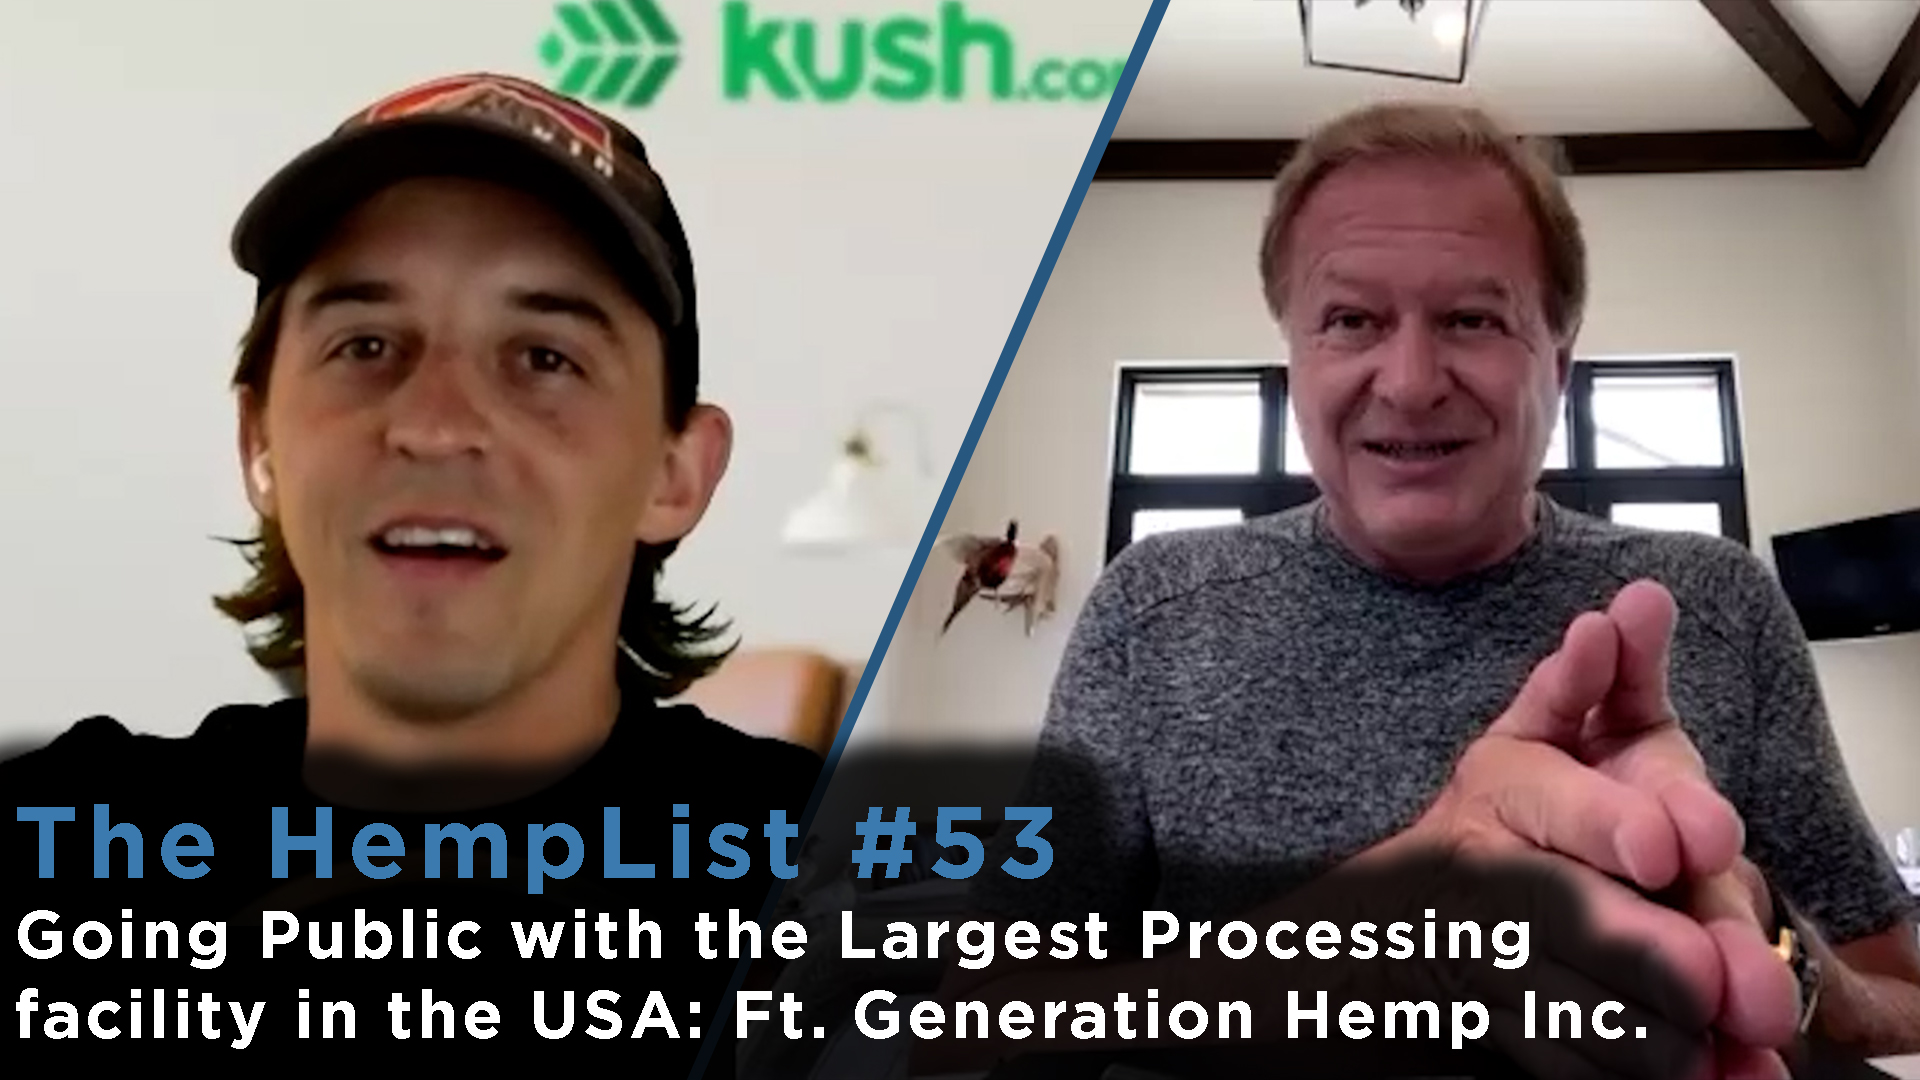 The HempList #53: Going Public with the Largest Hemp Processing facility in the US: (GENH) Generation Hemp Inc